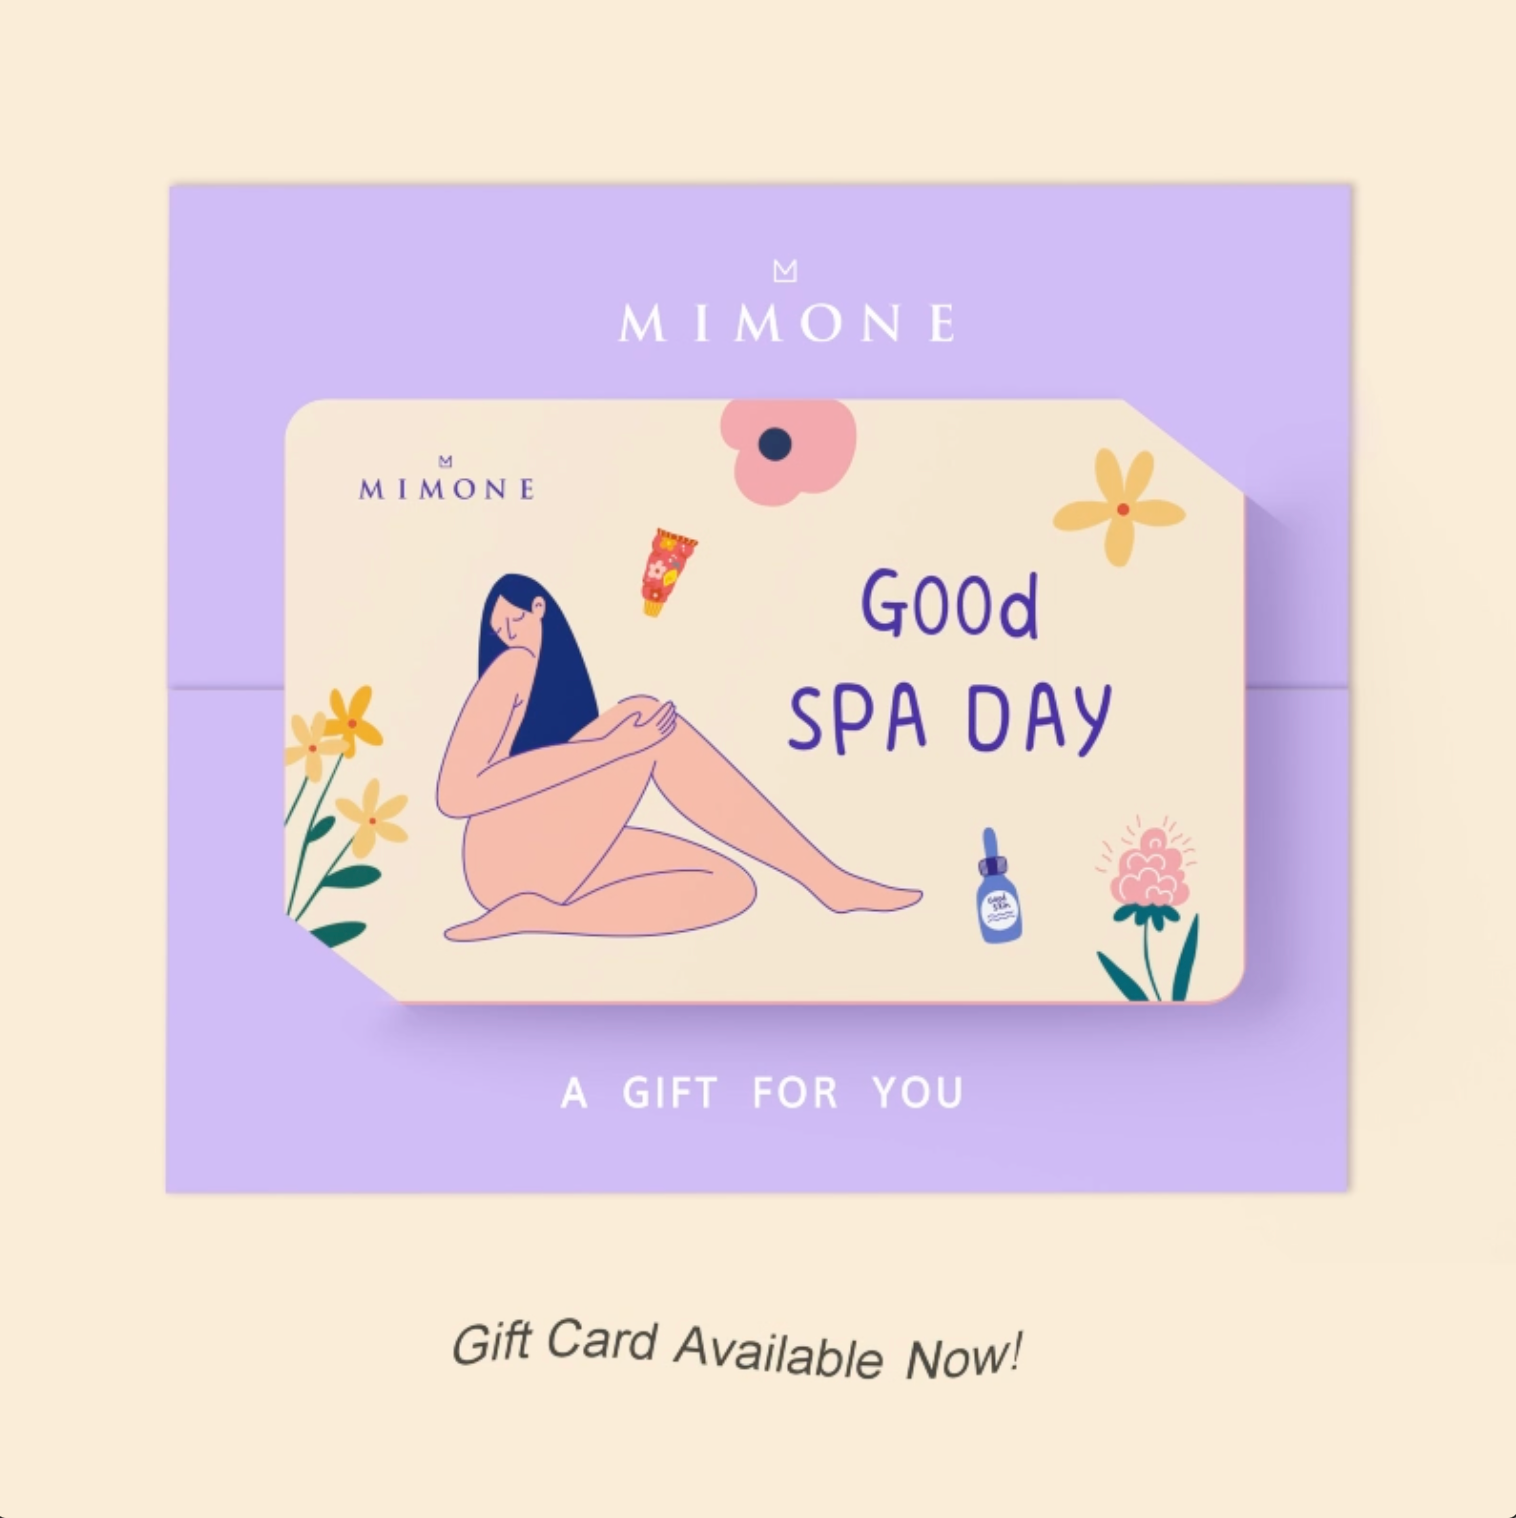 Physical Gift Card (In Store Use) Design B: Good Spa Day